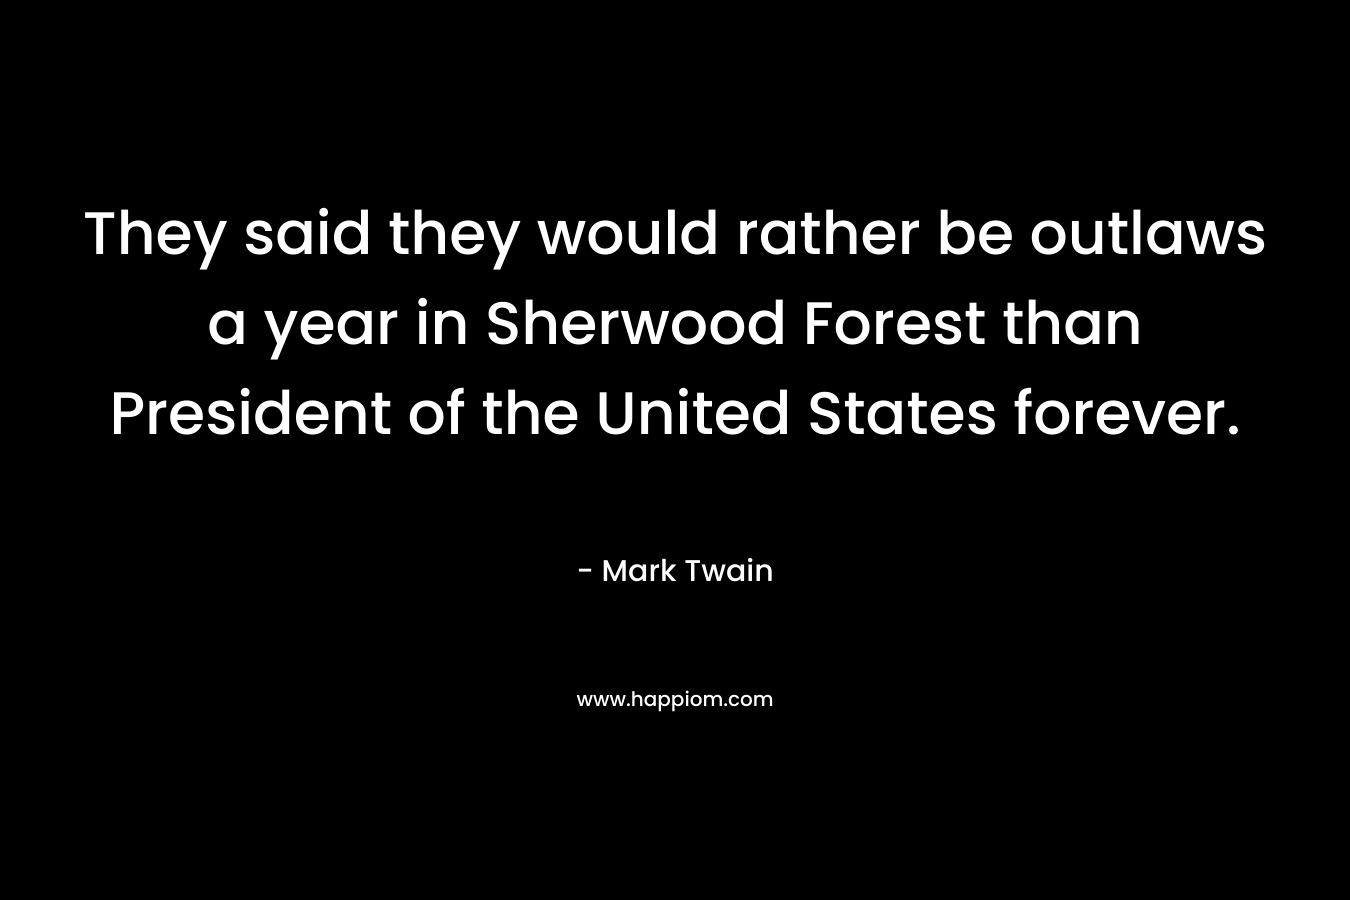 They said they would rather be outlaws a year in Sherwood Forest than President of the United States forever.